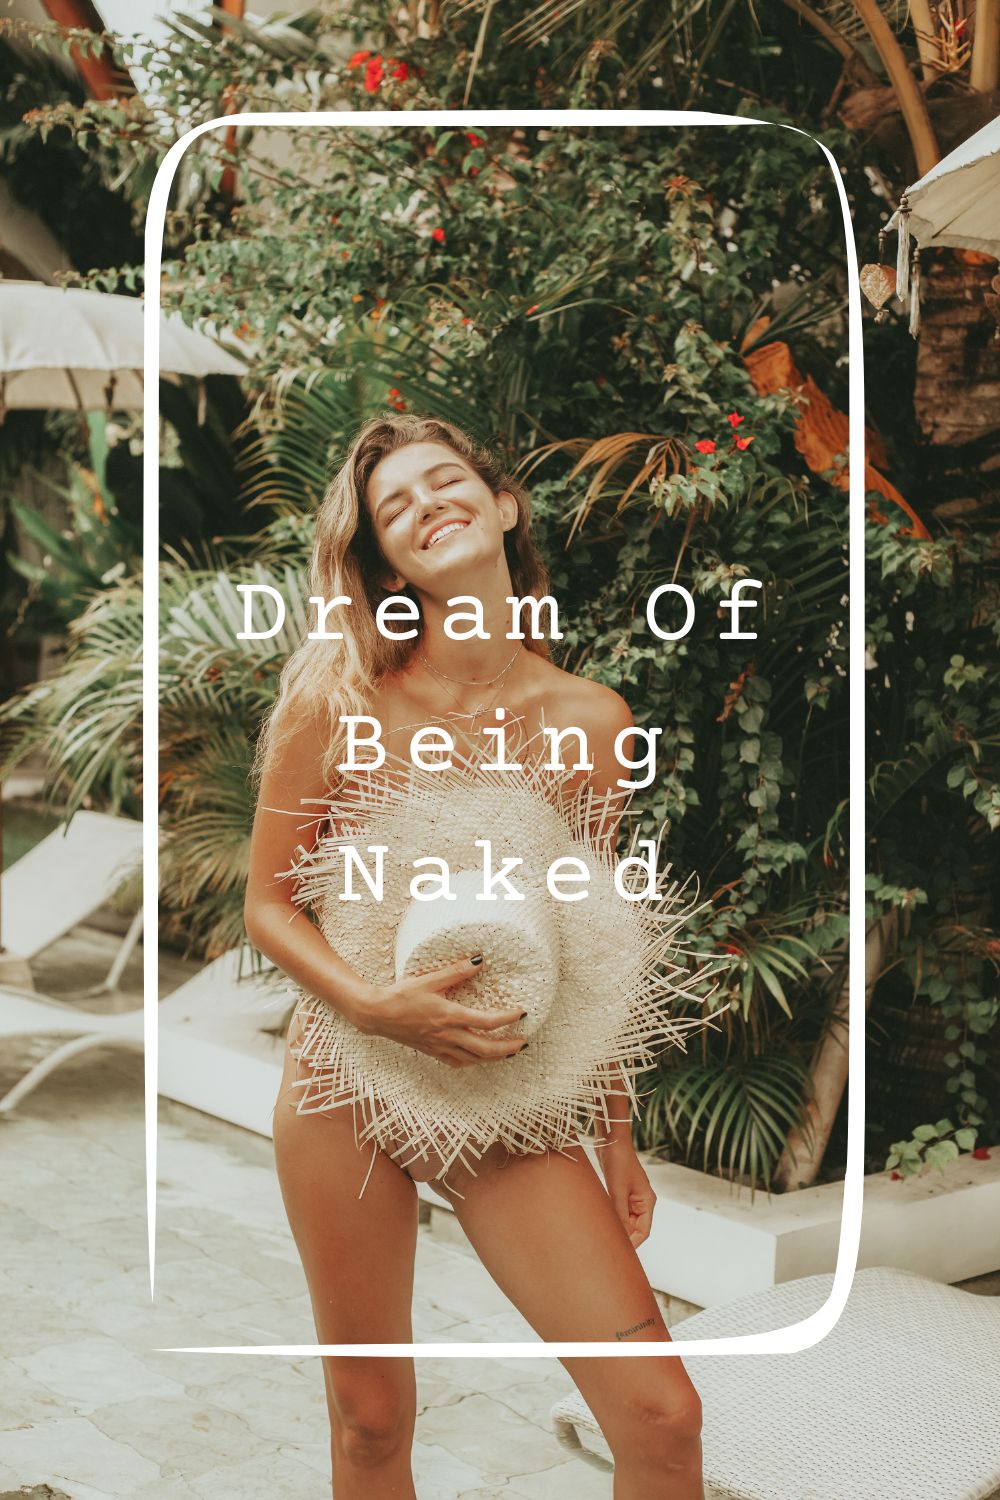 Dream Of Being Naked Meanings 2